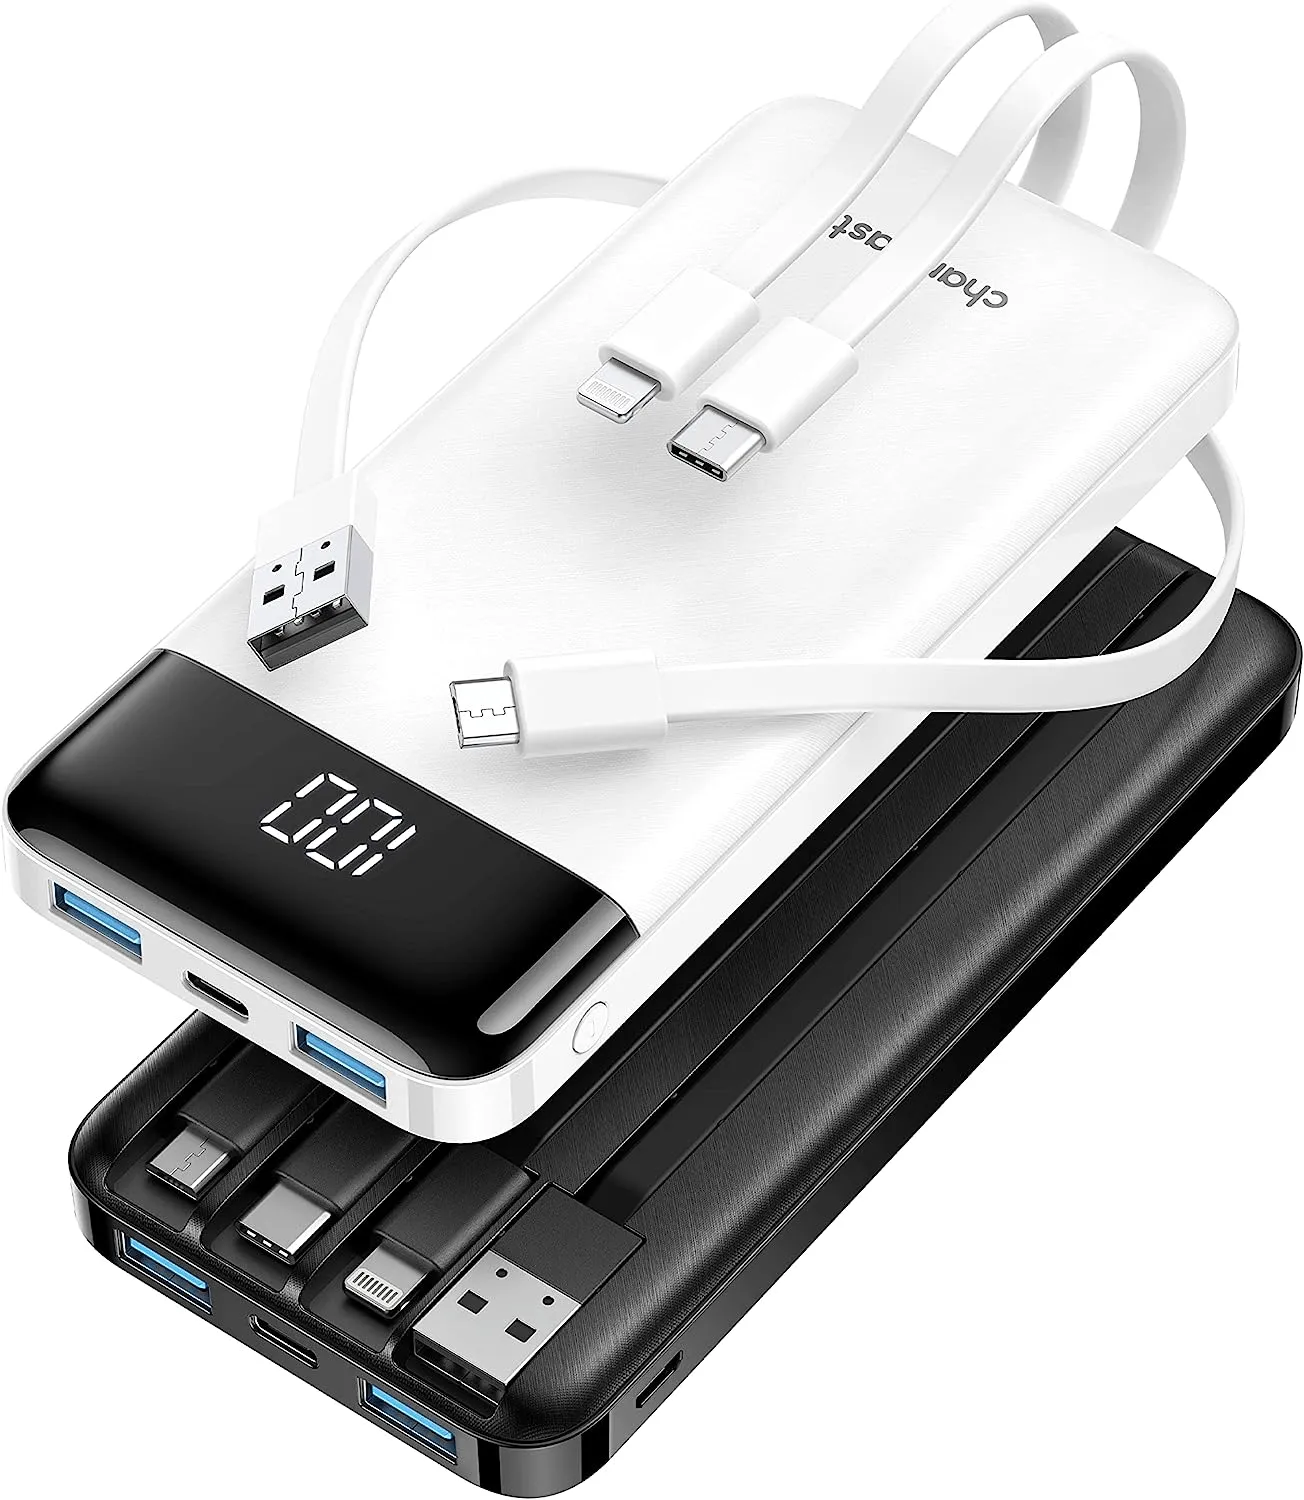 Double Pack Power Bank with built-in cables